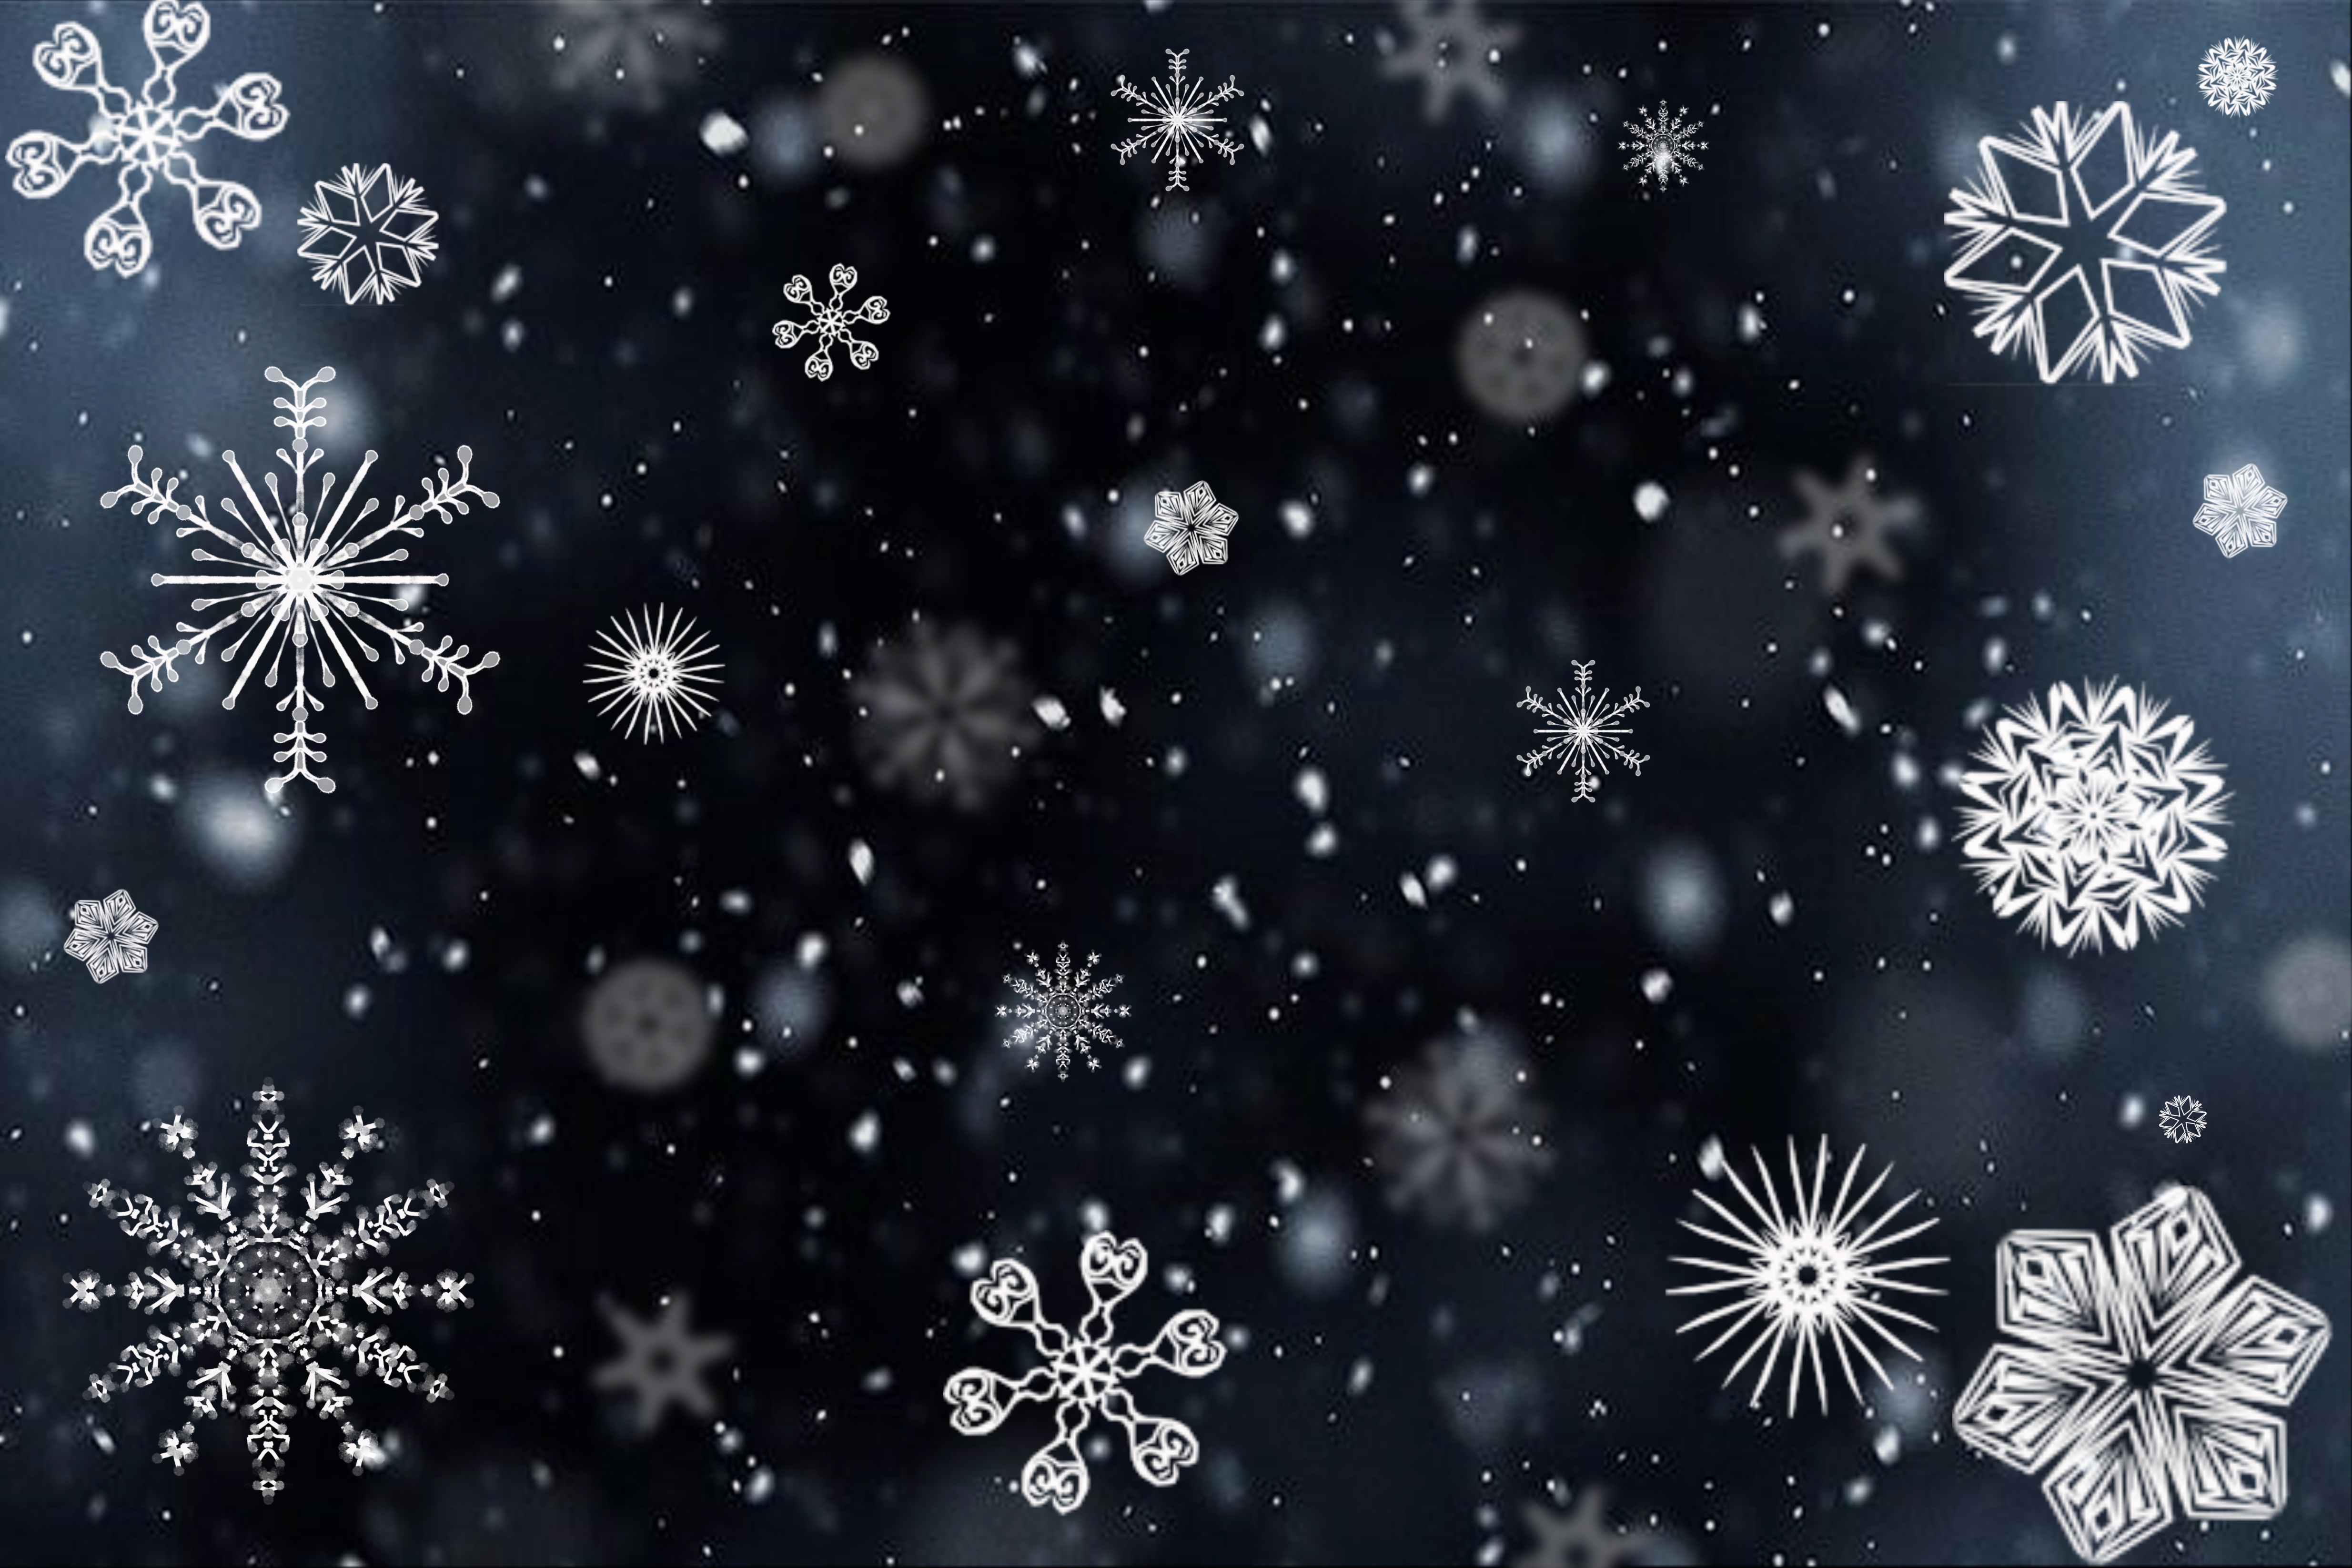 winter, patterns, holidays, snowflakes, texture lock screen backgrounds